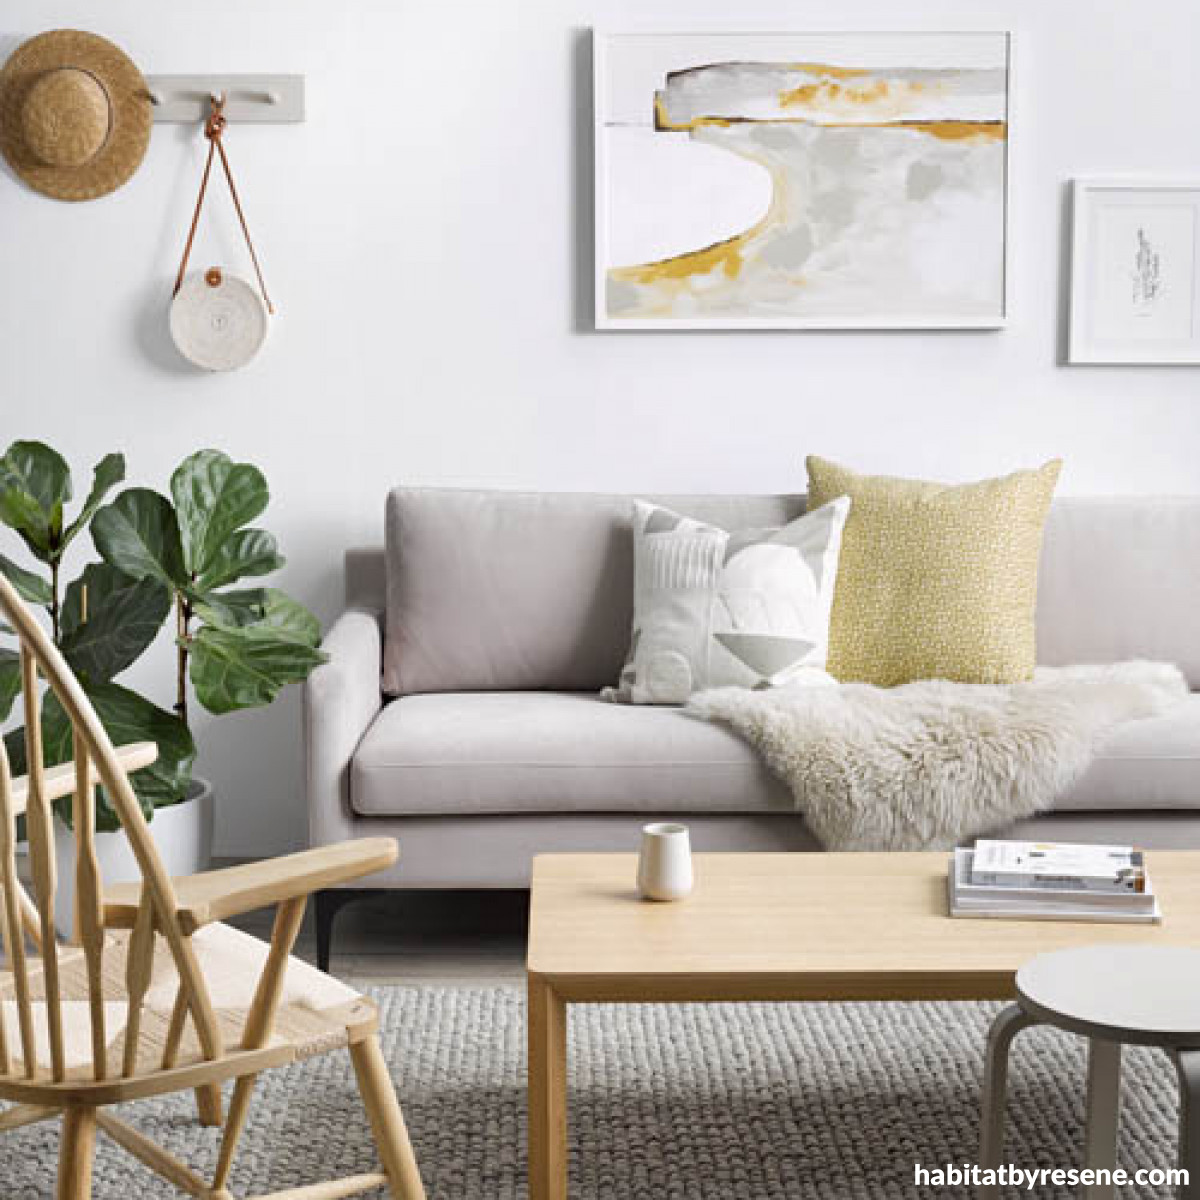 5 ways to update your space without buying new stuff | Habitat by Resene